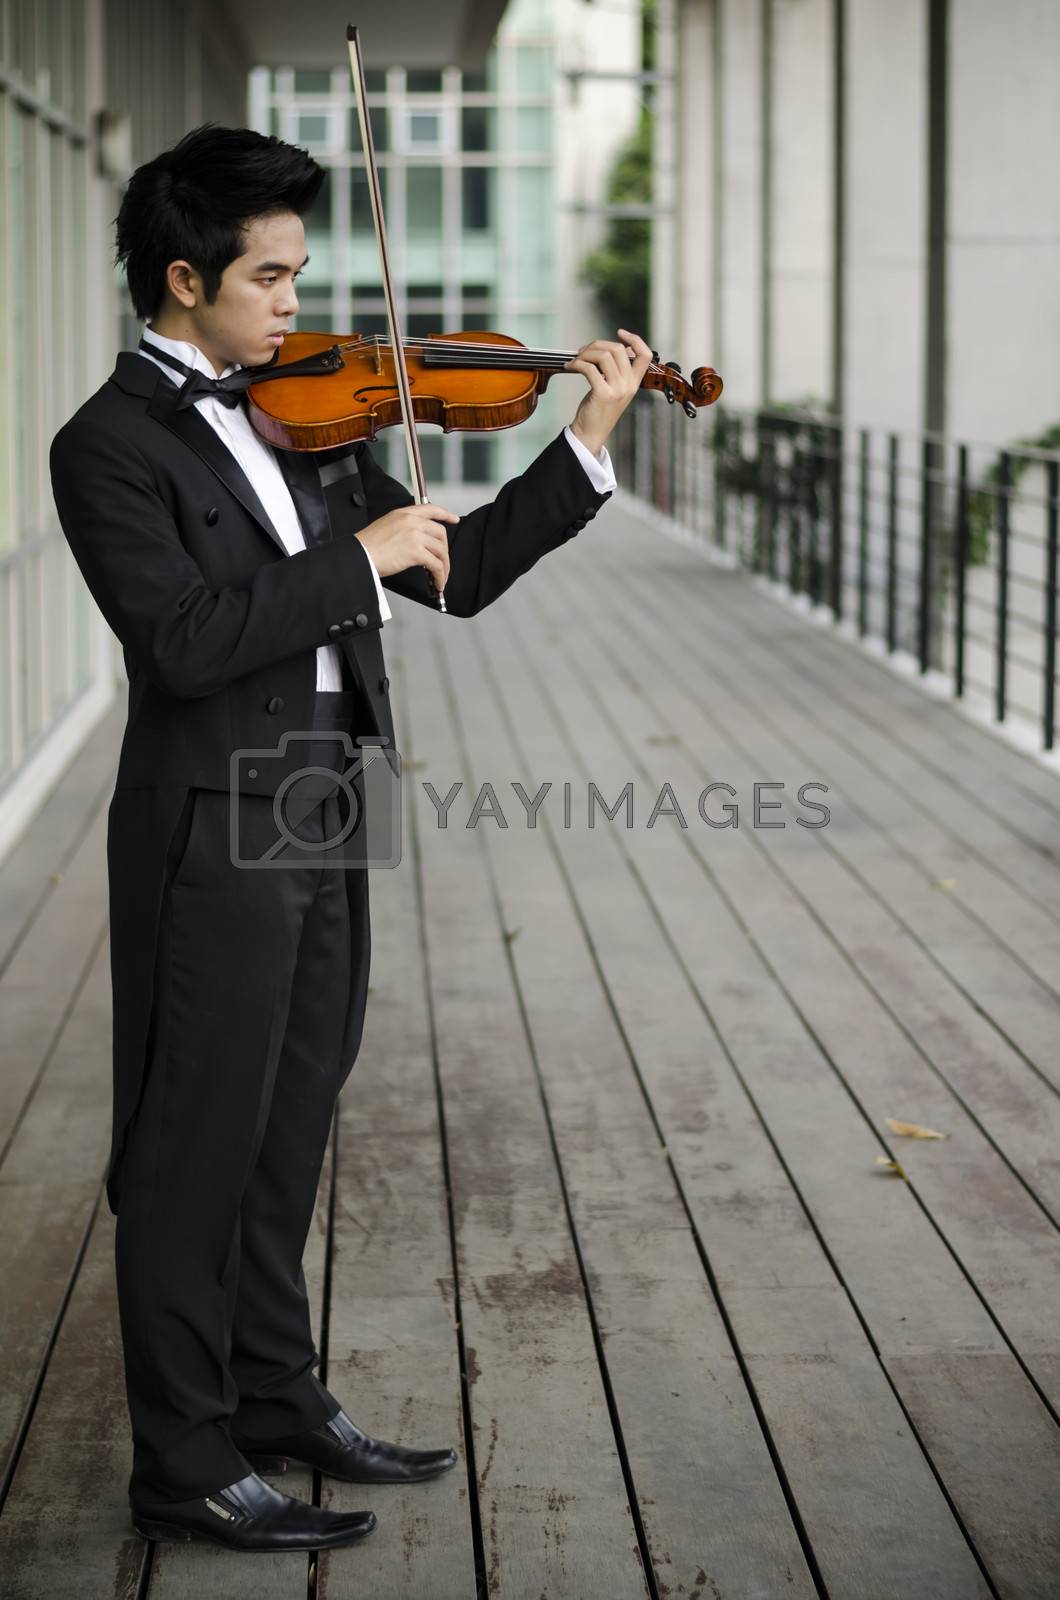 Royalty free image of asia man with his violin by ammza12